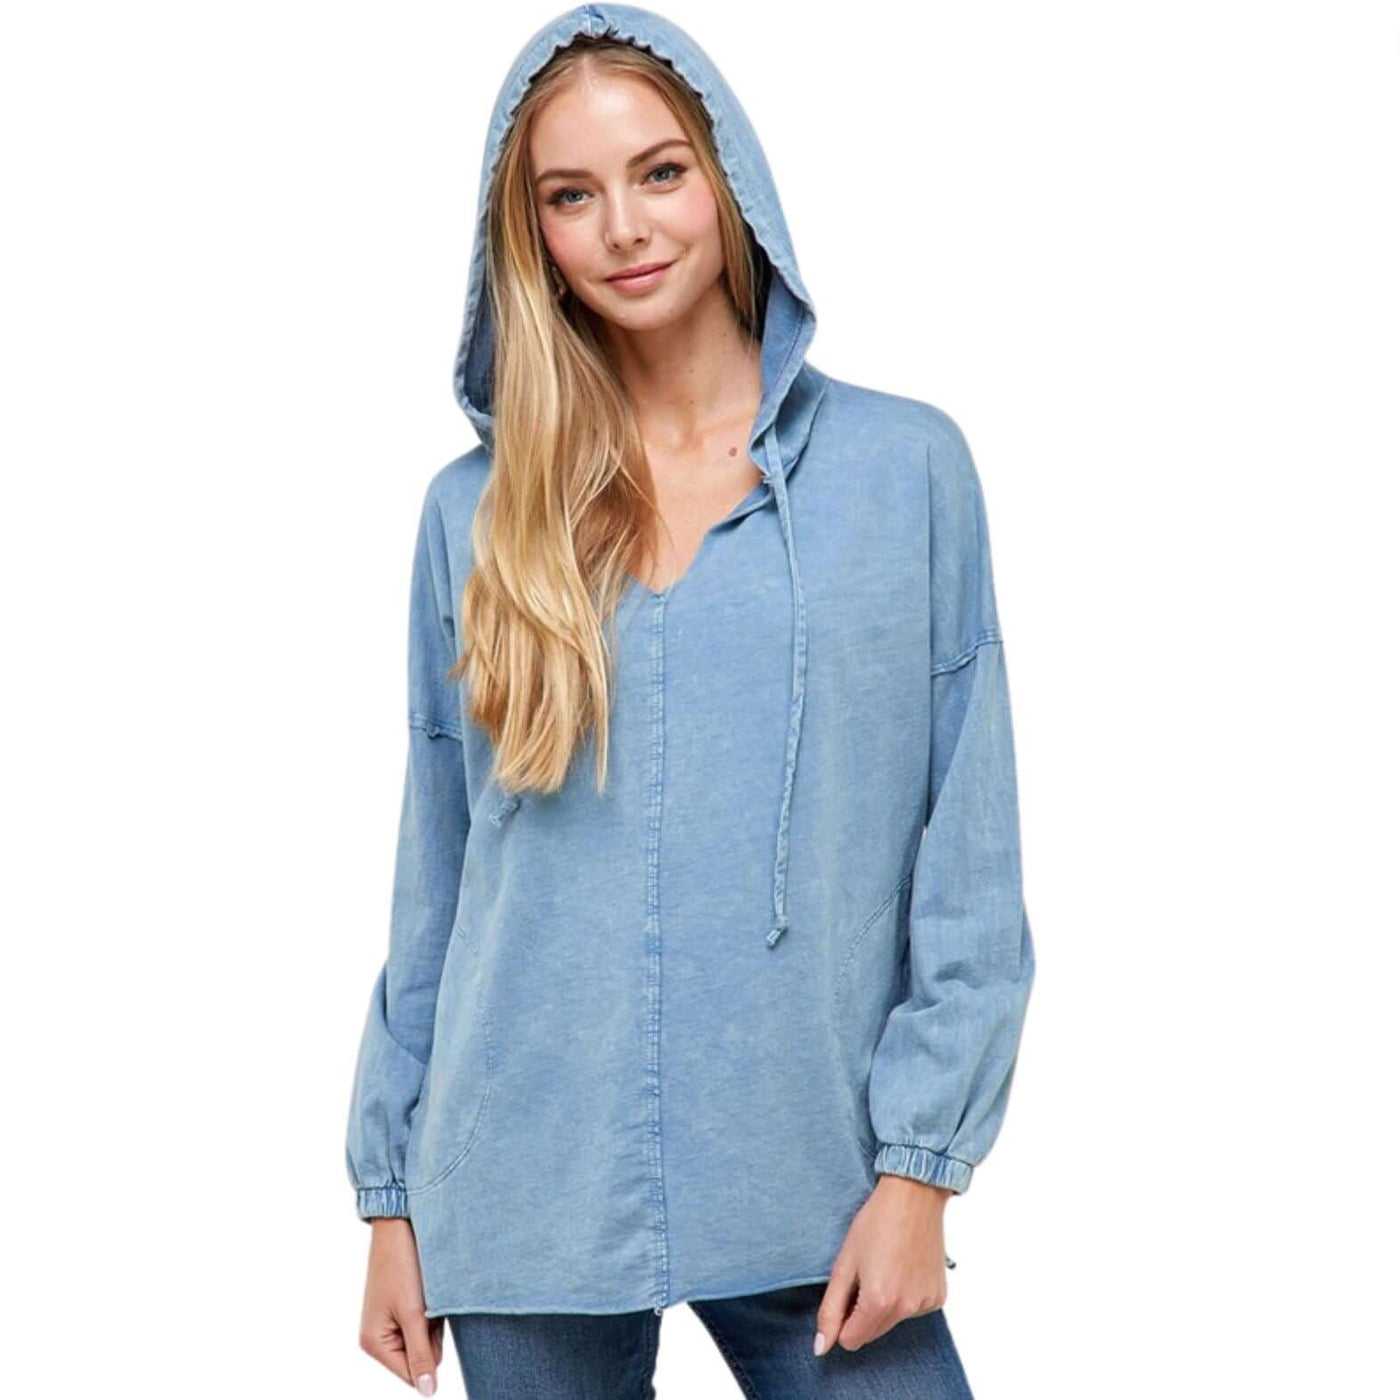 USA made ladies relaxed fit 100% cotton mineral washed tunic with drawstring hoodie Chambray Blue | Classy Cozy Cool Women's Made in America Boutique